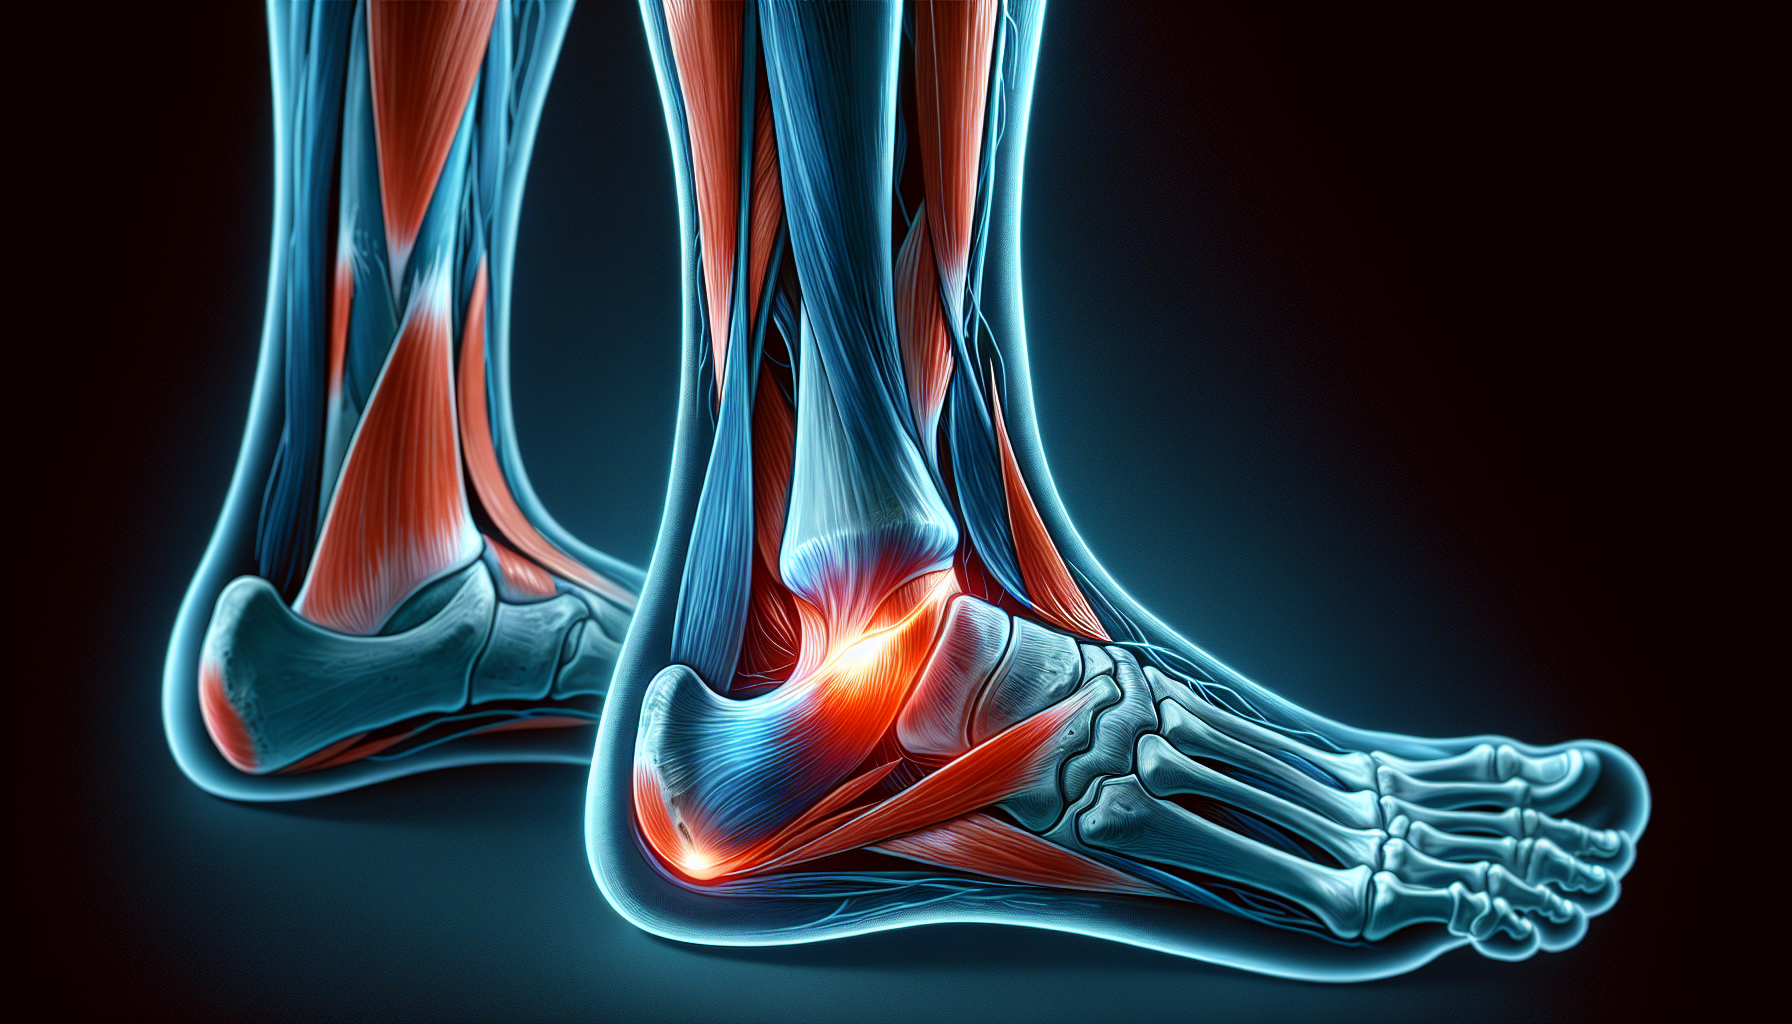 Illustration of the lower leg muscles and tendons